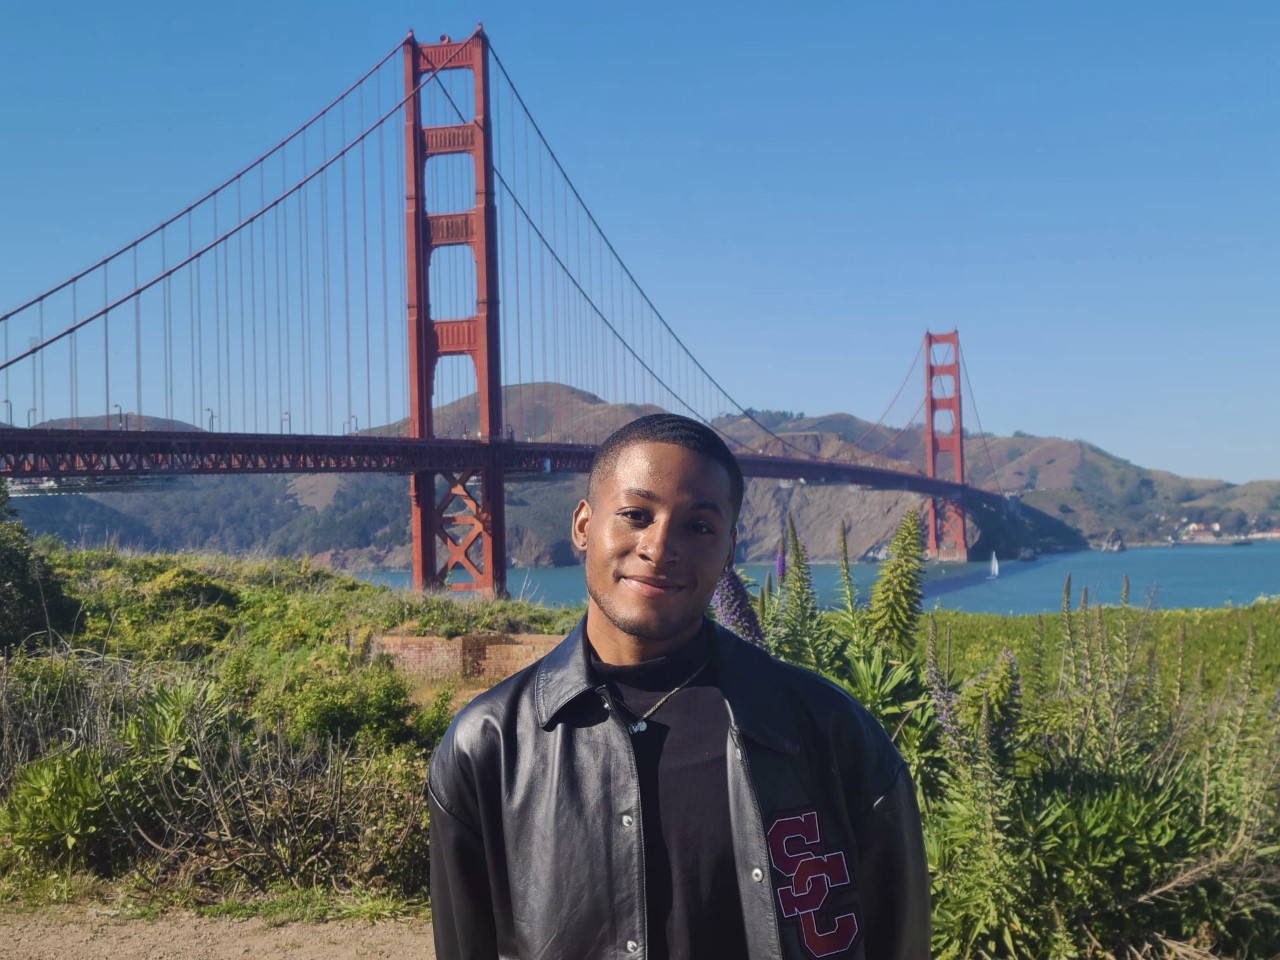 Ikym SImon stands in front of the Golden Gate Bridge. They are smiling and wearing a leather jacket.